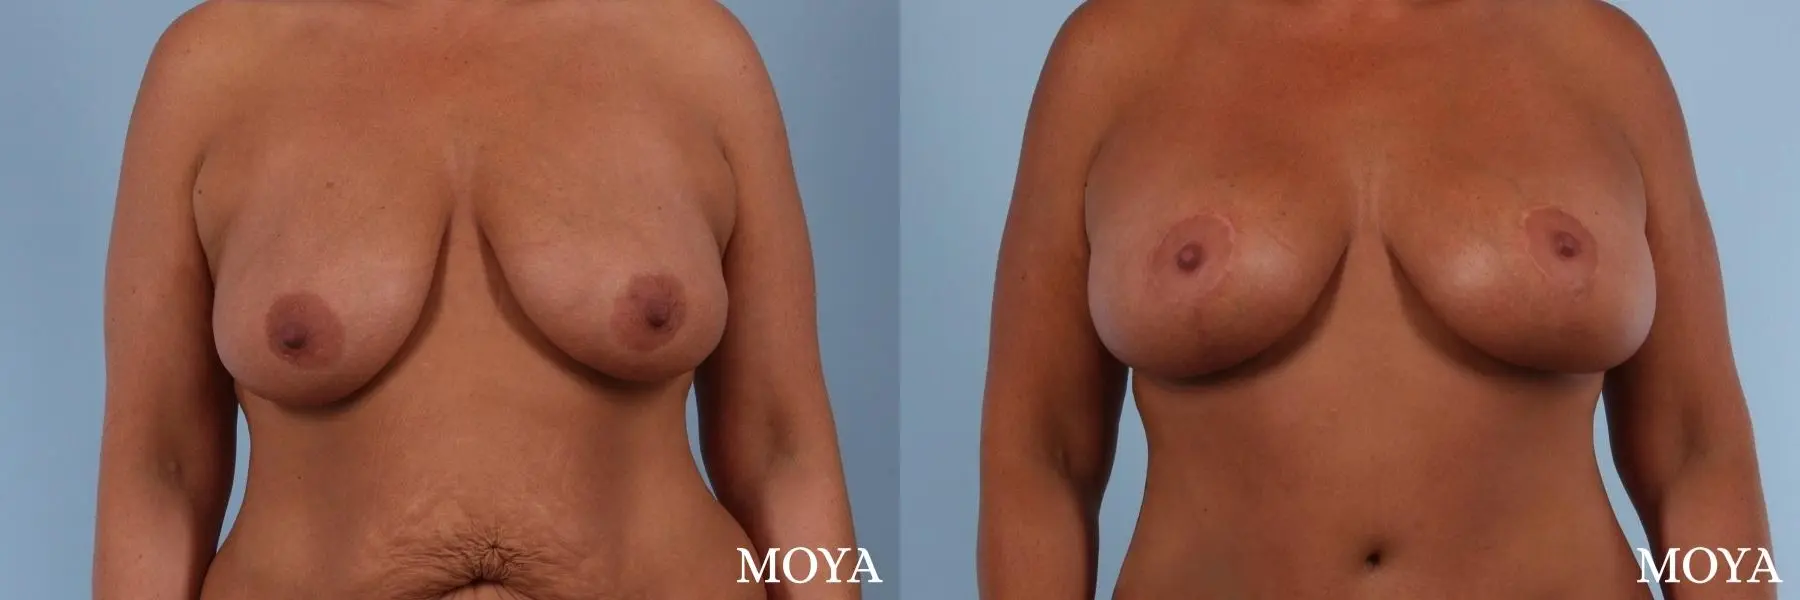 Breast Augmentation With Lift: Patient 8 - Before and After 1